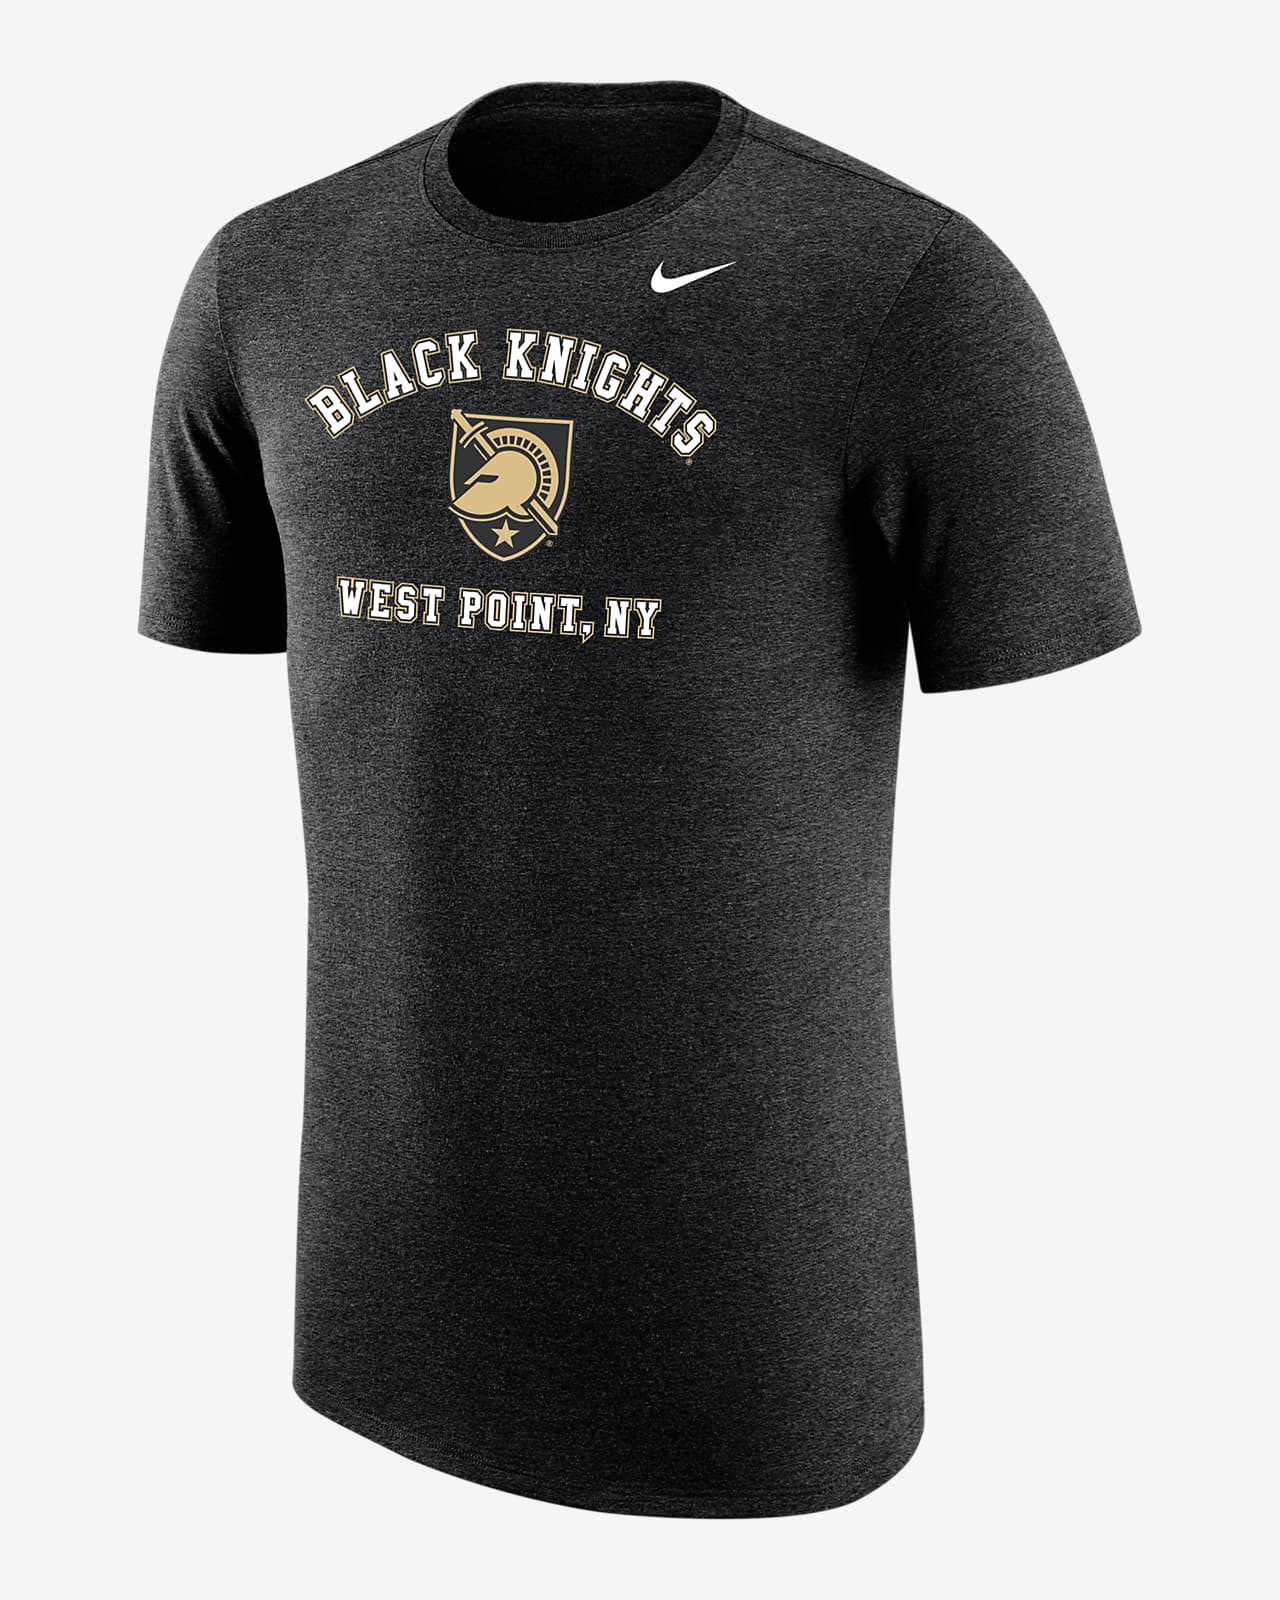 Army Men's Nike College T-Shirt